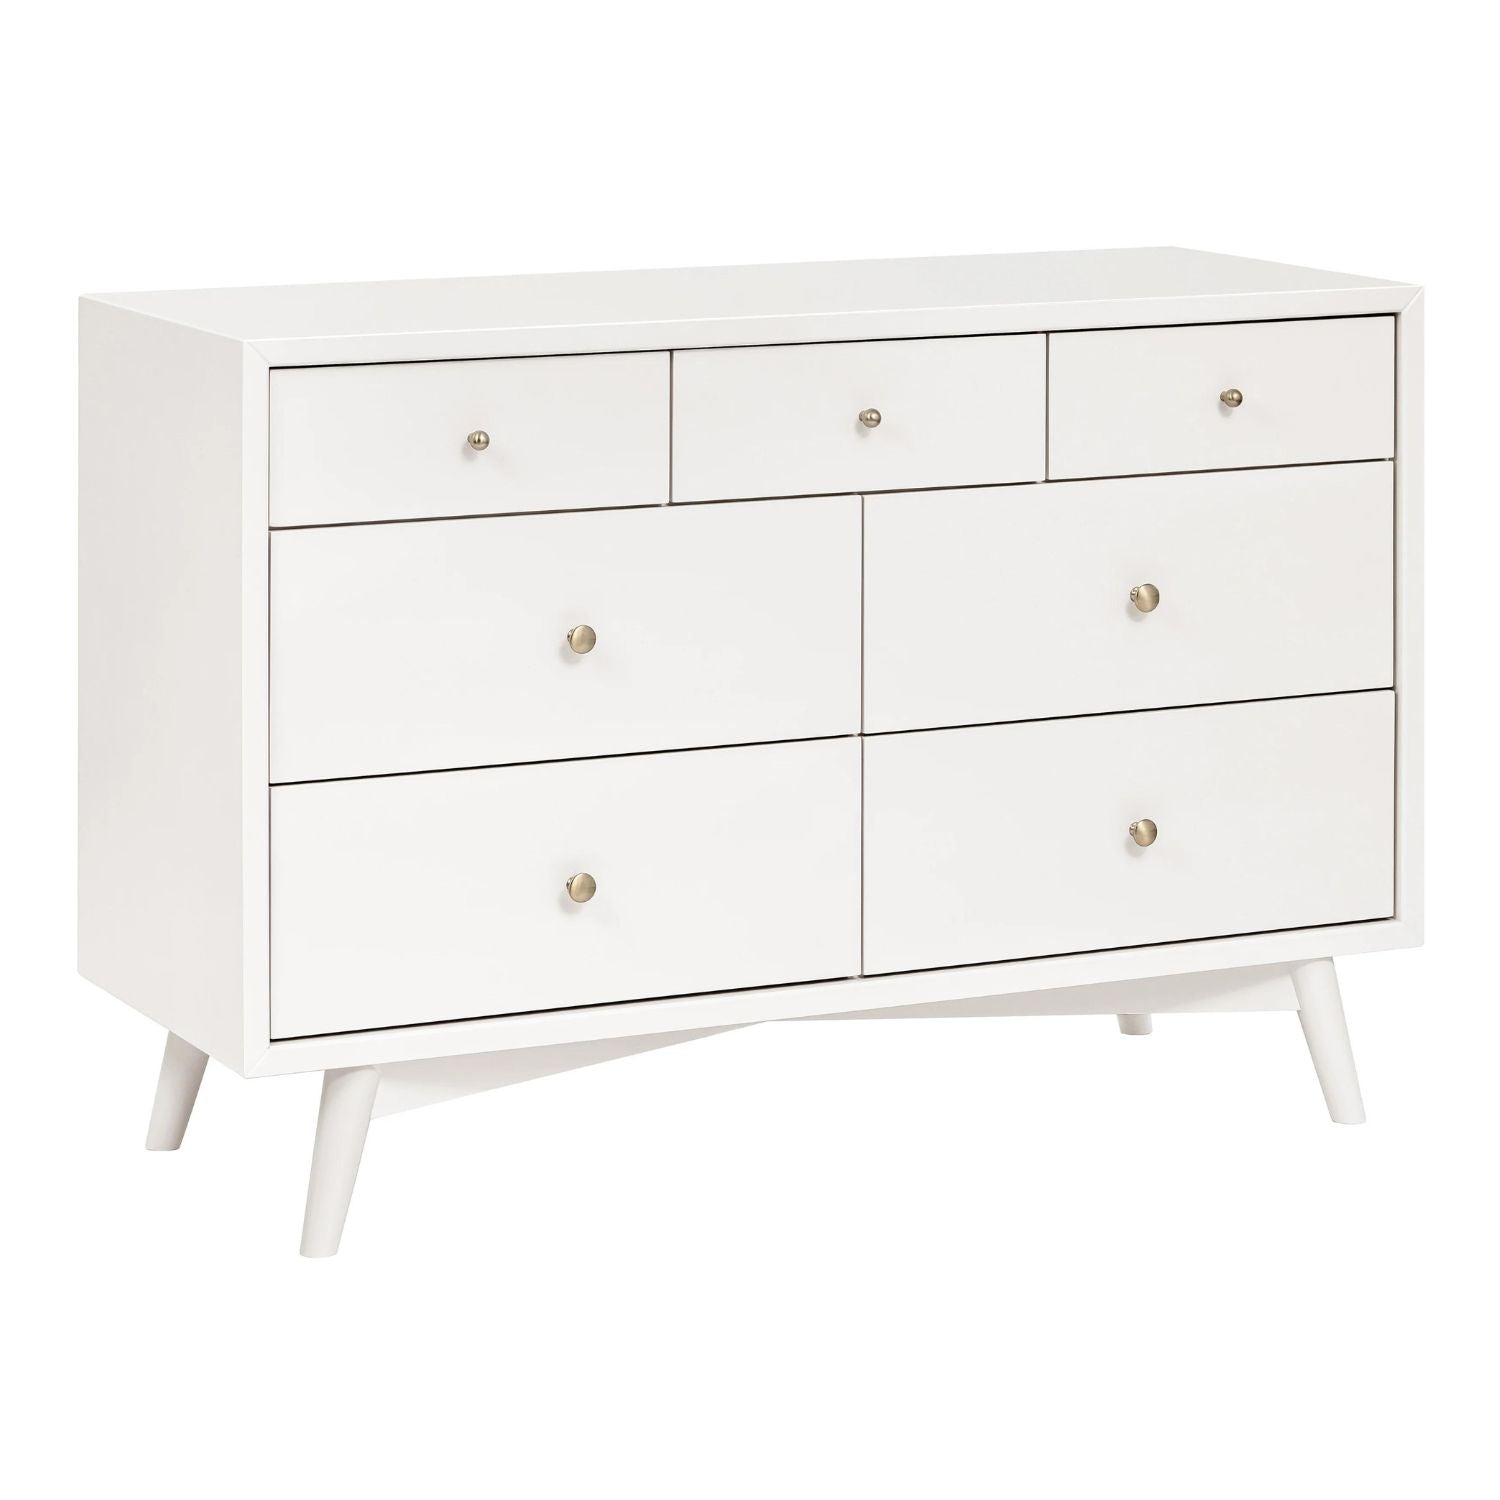 Babyletto Palma 7-Drawer Assembled Double Dresser - Warm White